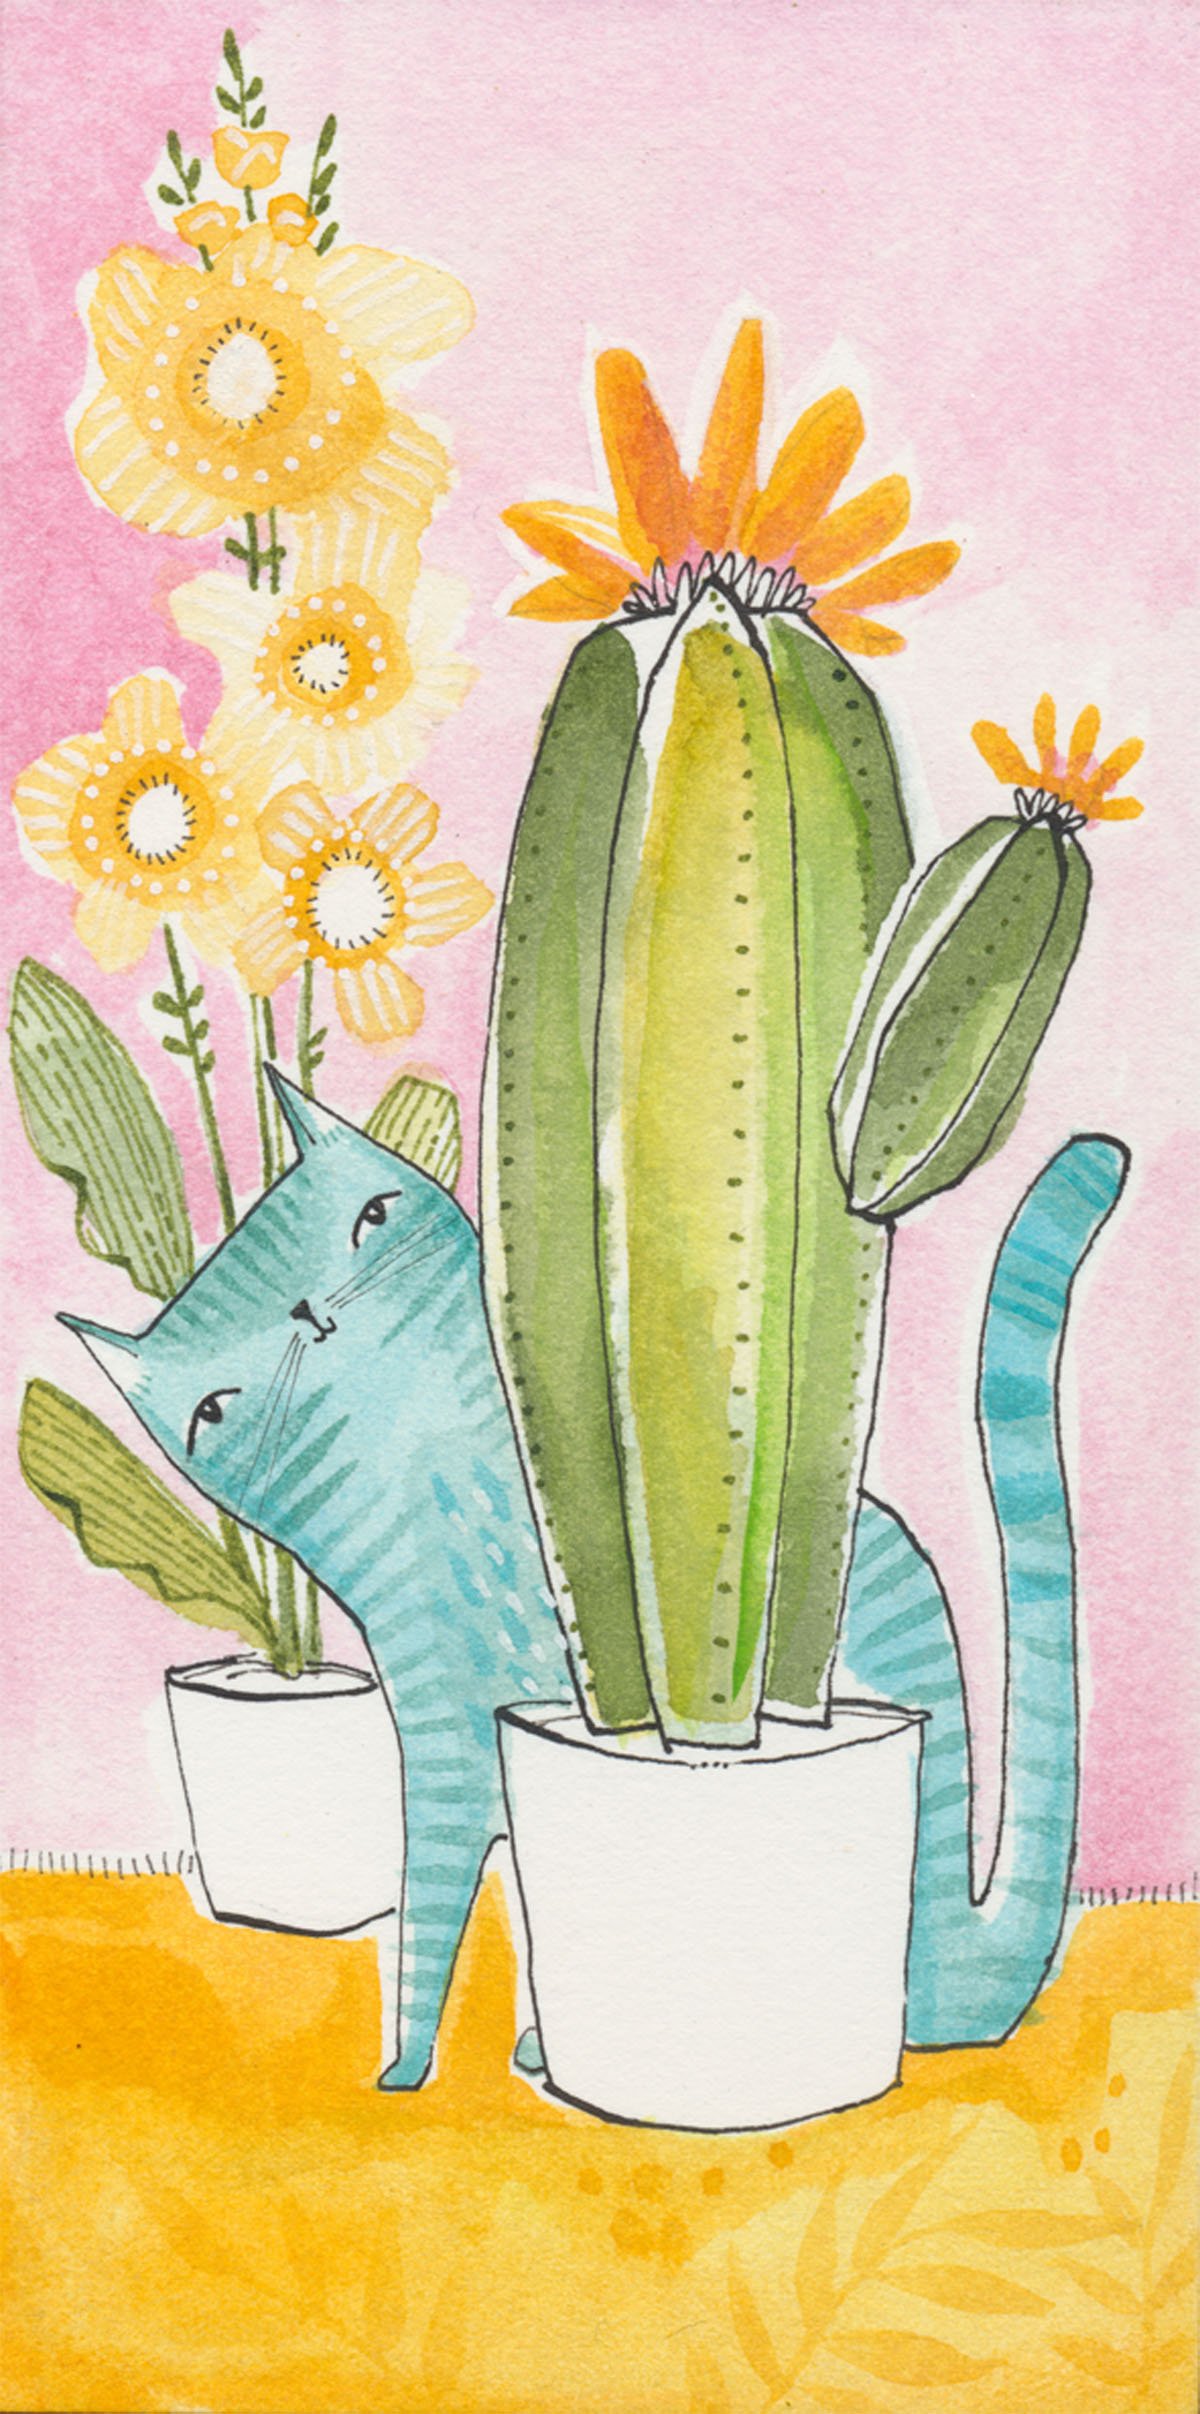 Image of kitty cat cactus, a watercolor painting by cori dantini